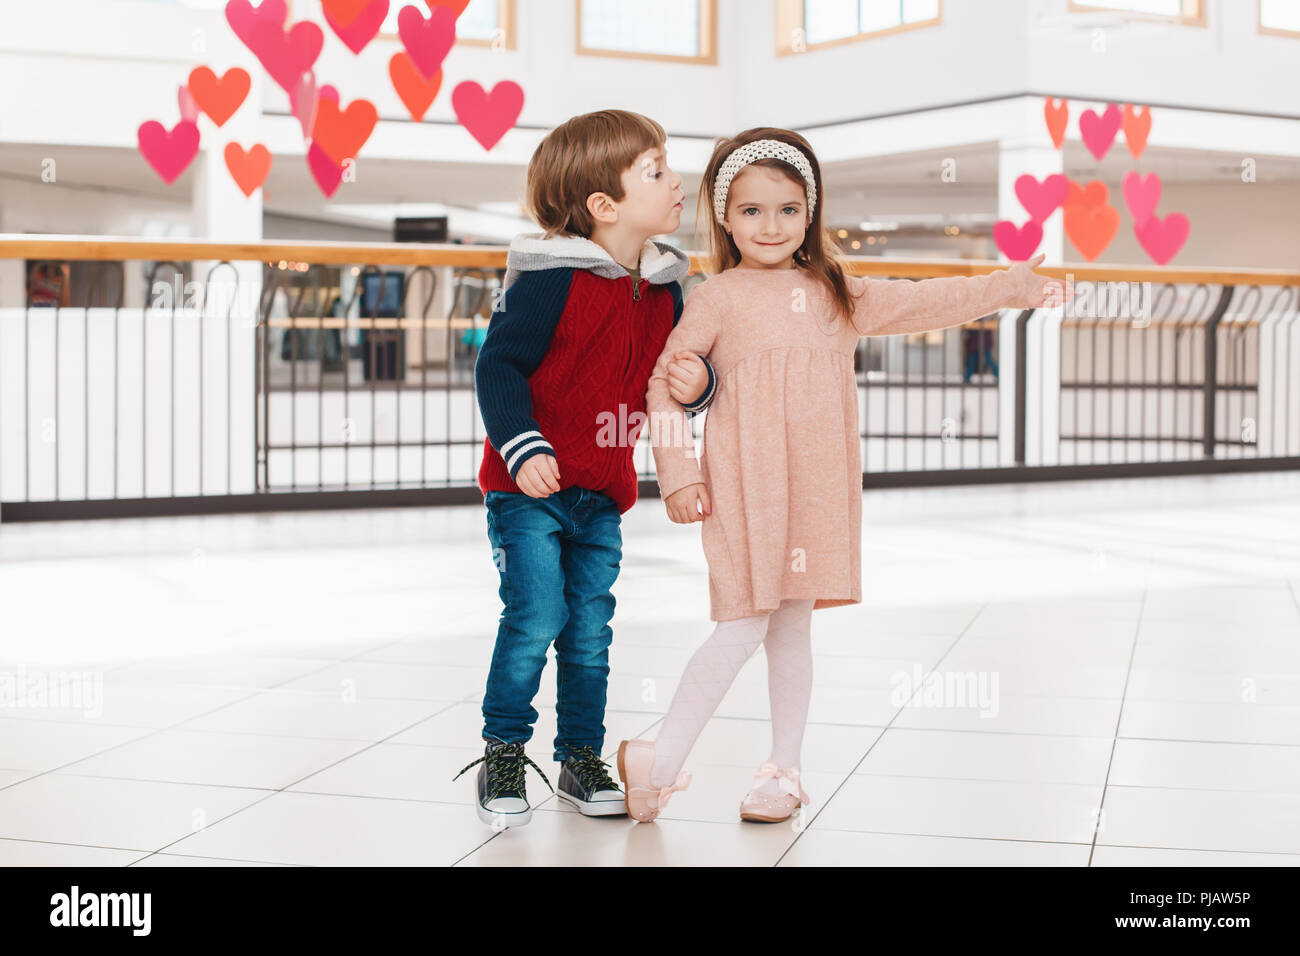 Group Portrait Of Two White Caucasian Cute Adorable Funny Children Boy And Girl Playing With Each Other Love Friendship Fun Concept Best Friends For Stock Photo Alamy